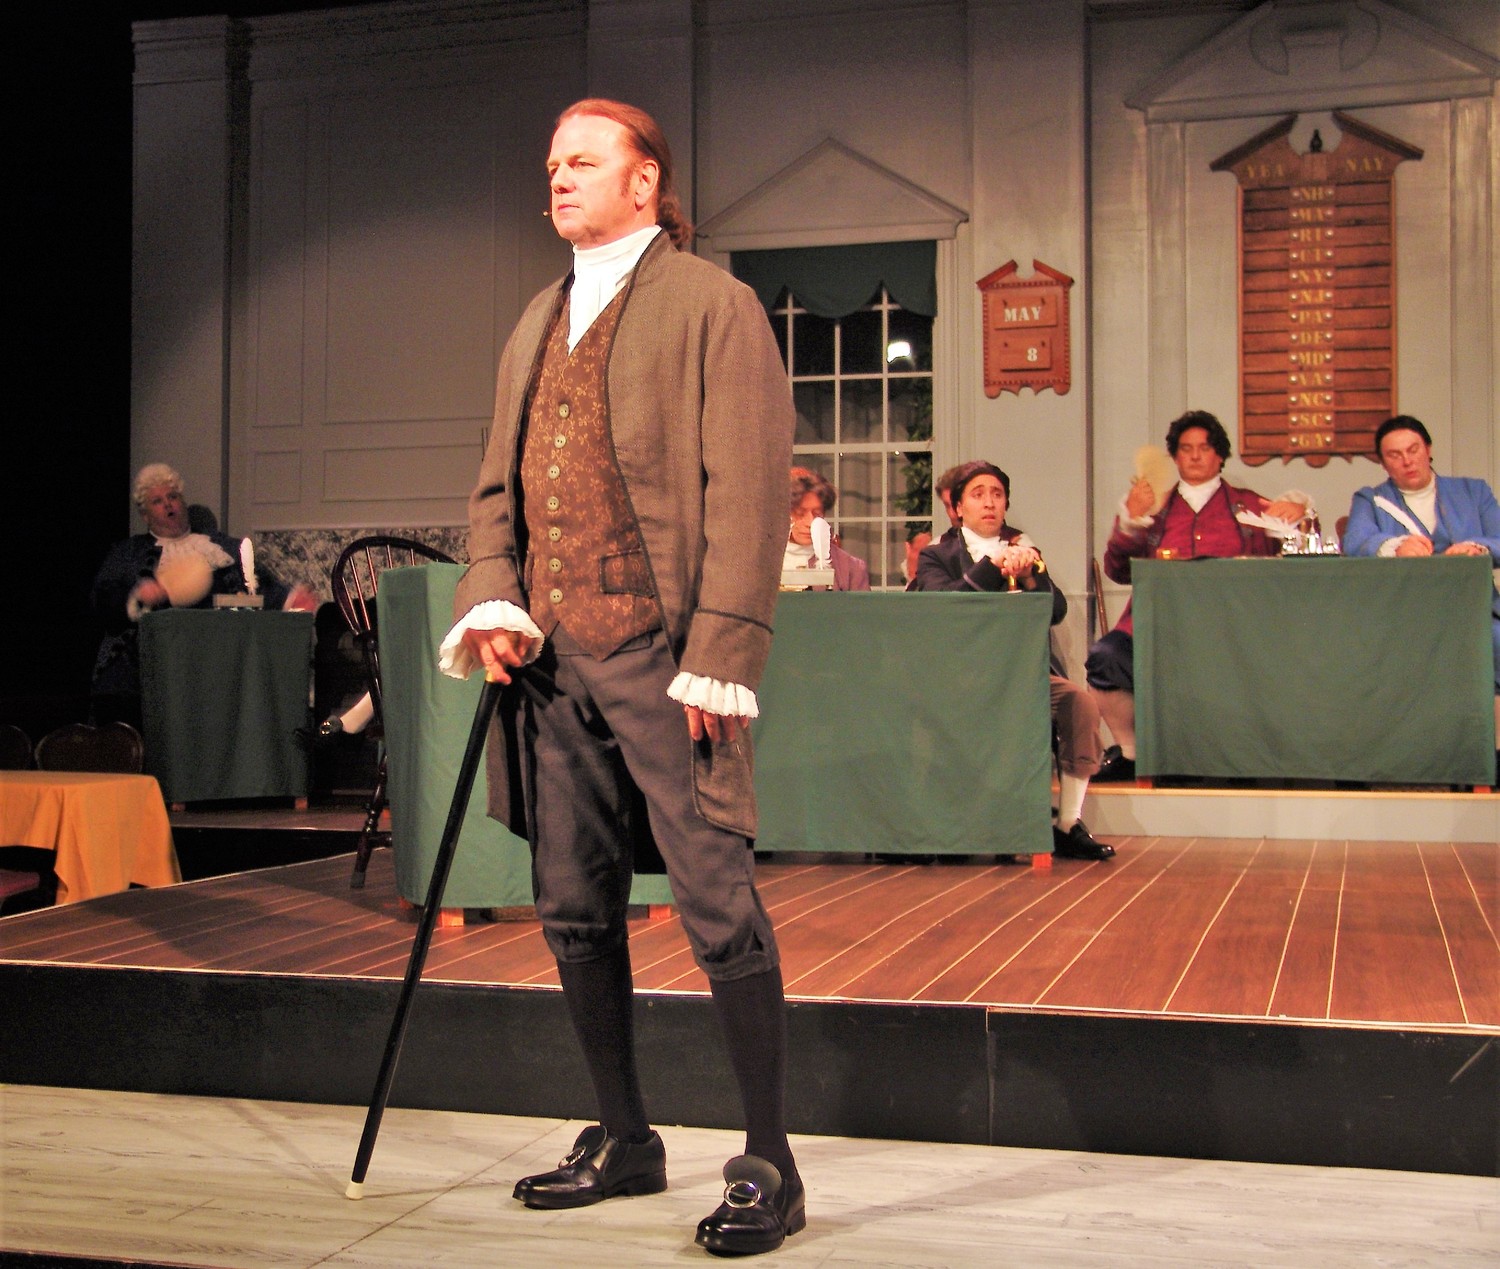 Tony Award-nominated stage, TV and film actor Kevin Anderson portrays the lead role of John Adams in the Alhambra Theatre & Dining's production of “1776.”